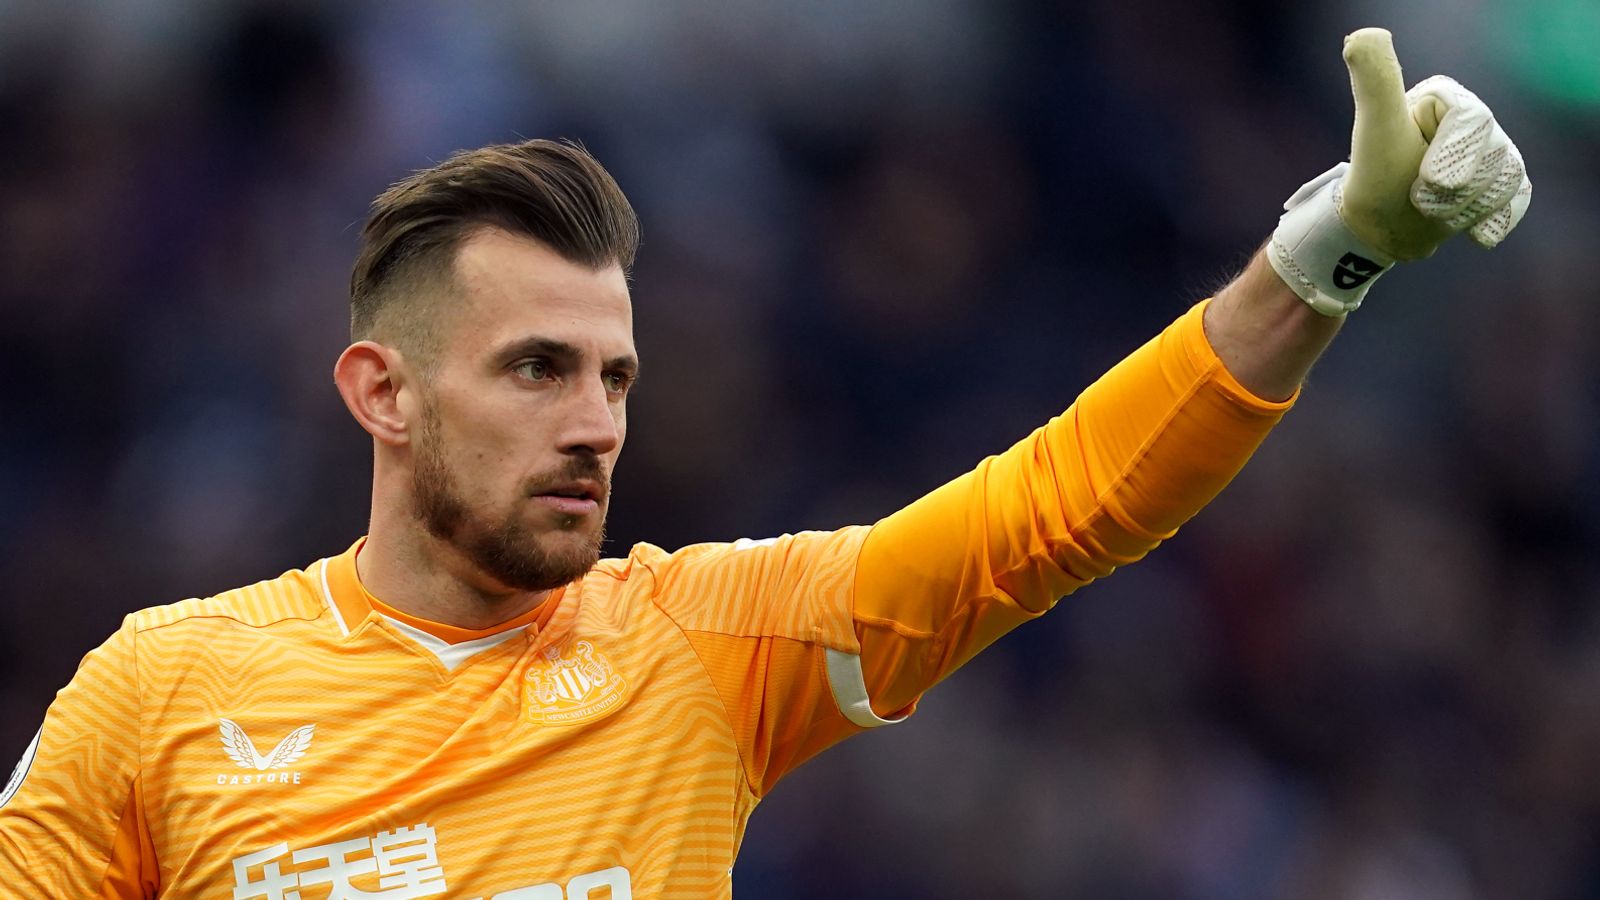 Manchester United sign Martin Dubravka from Newcastle on loan